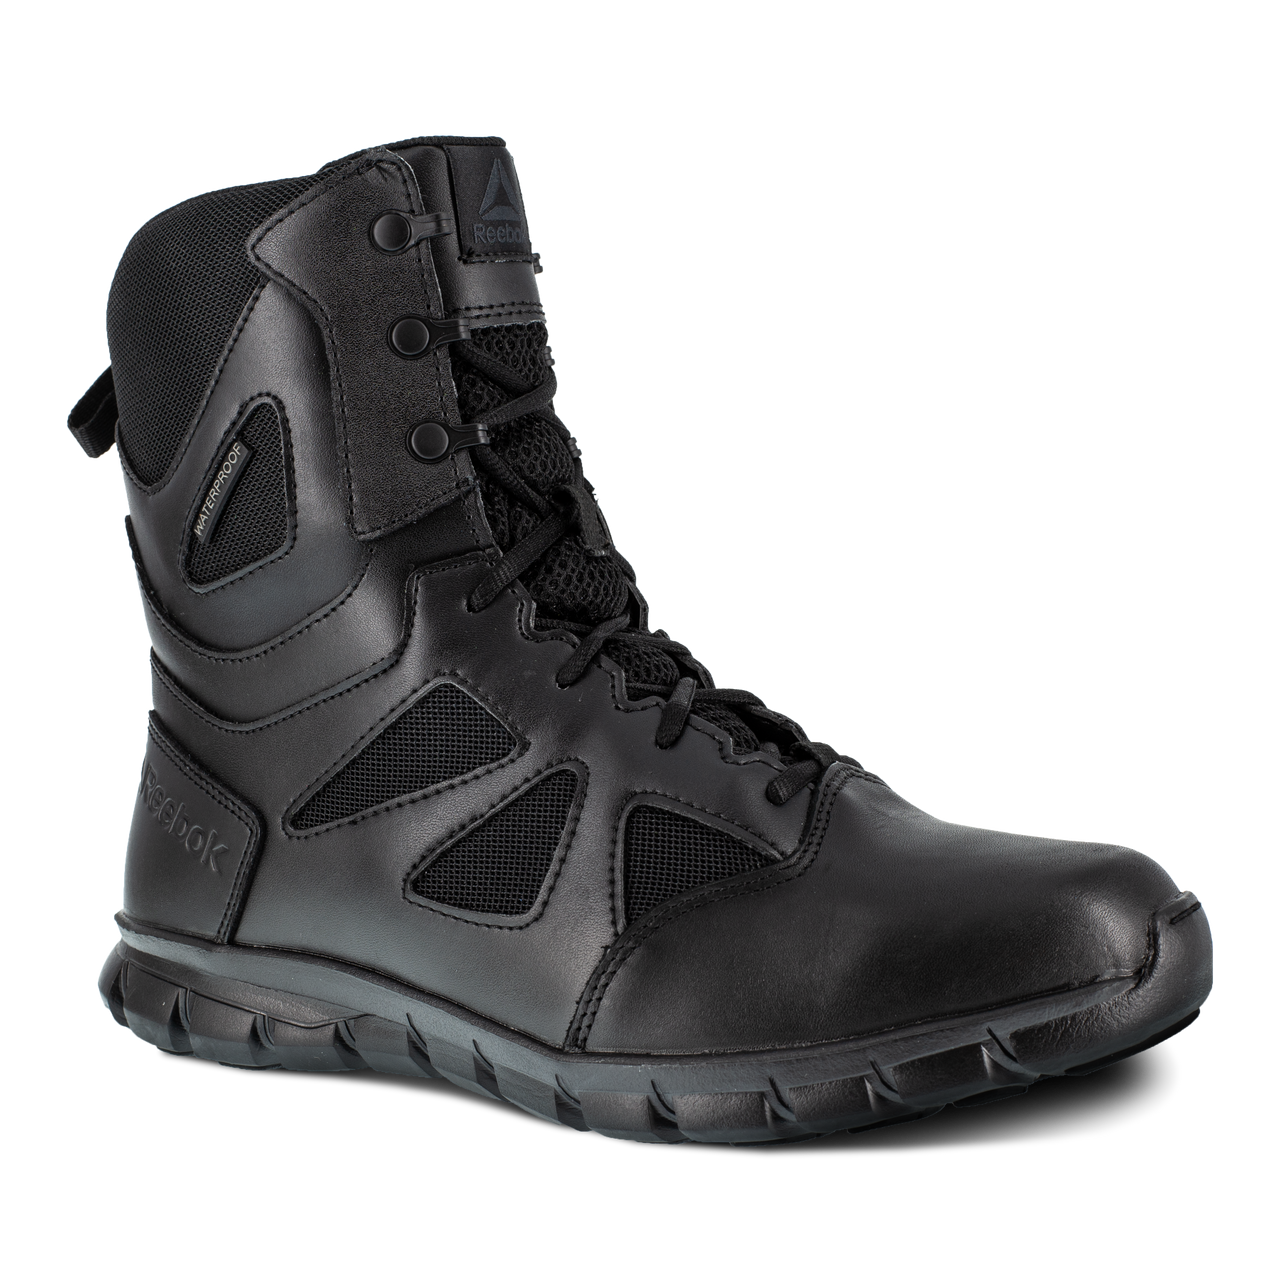 Sublite Cushion Tactical - RB806 - Women's 8" Tactical Boot - Reebok Work